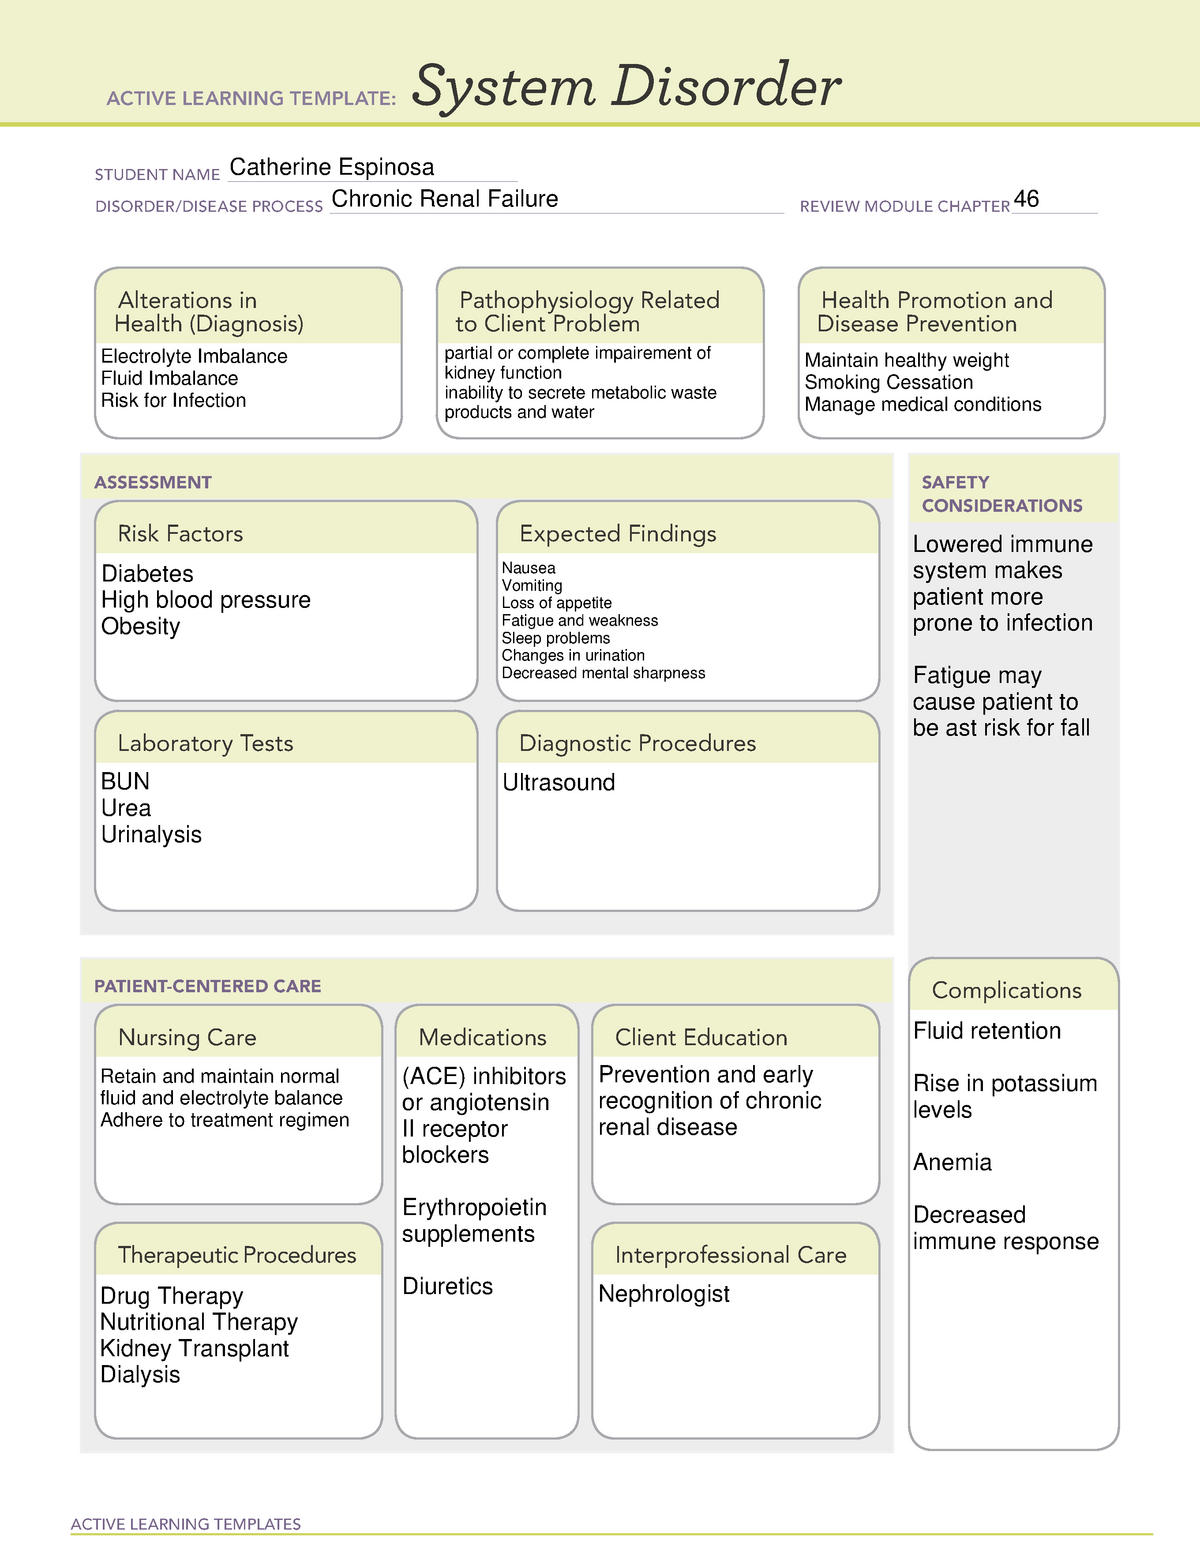 Chronic Renal Failure System Disorder ACTIVE LEARNING TEMPLATES